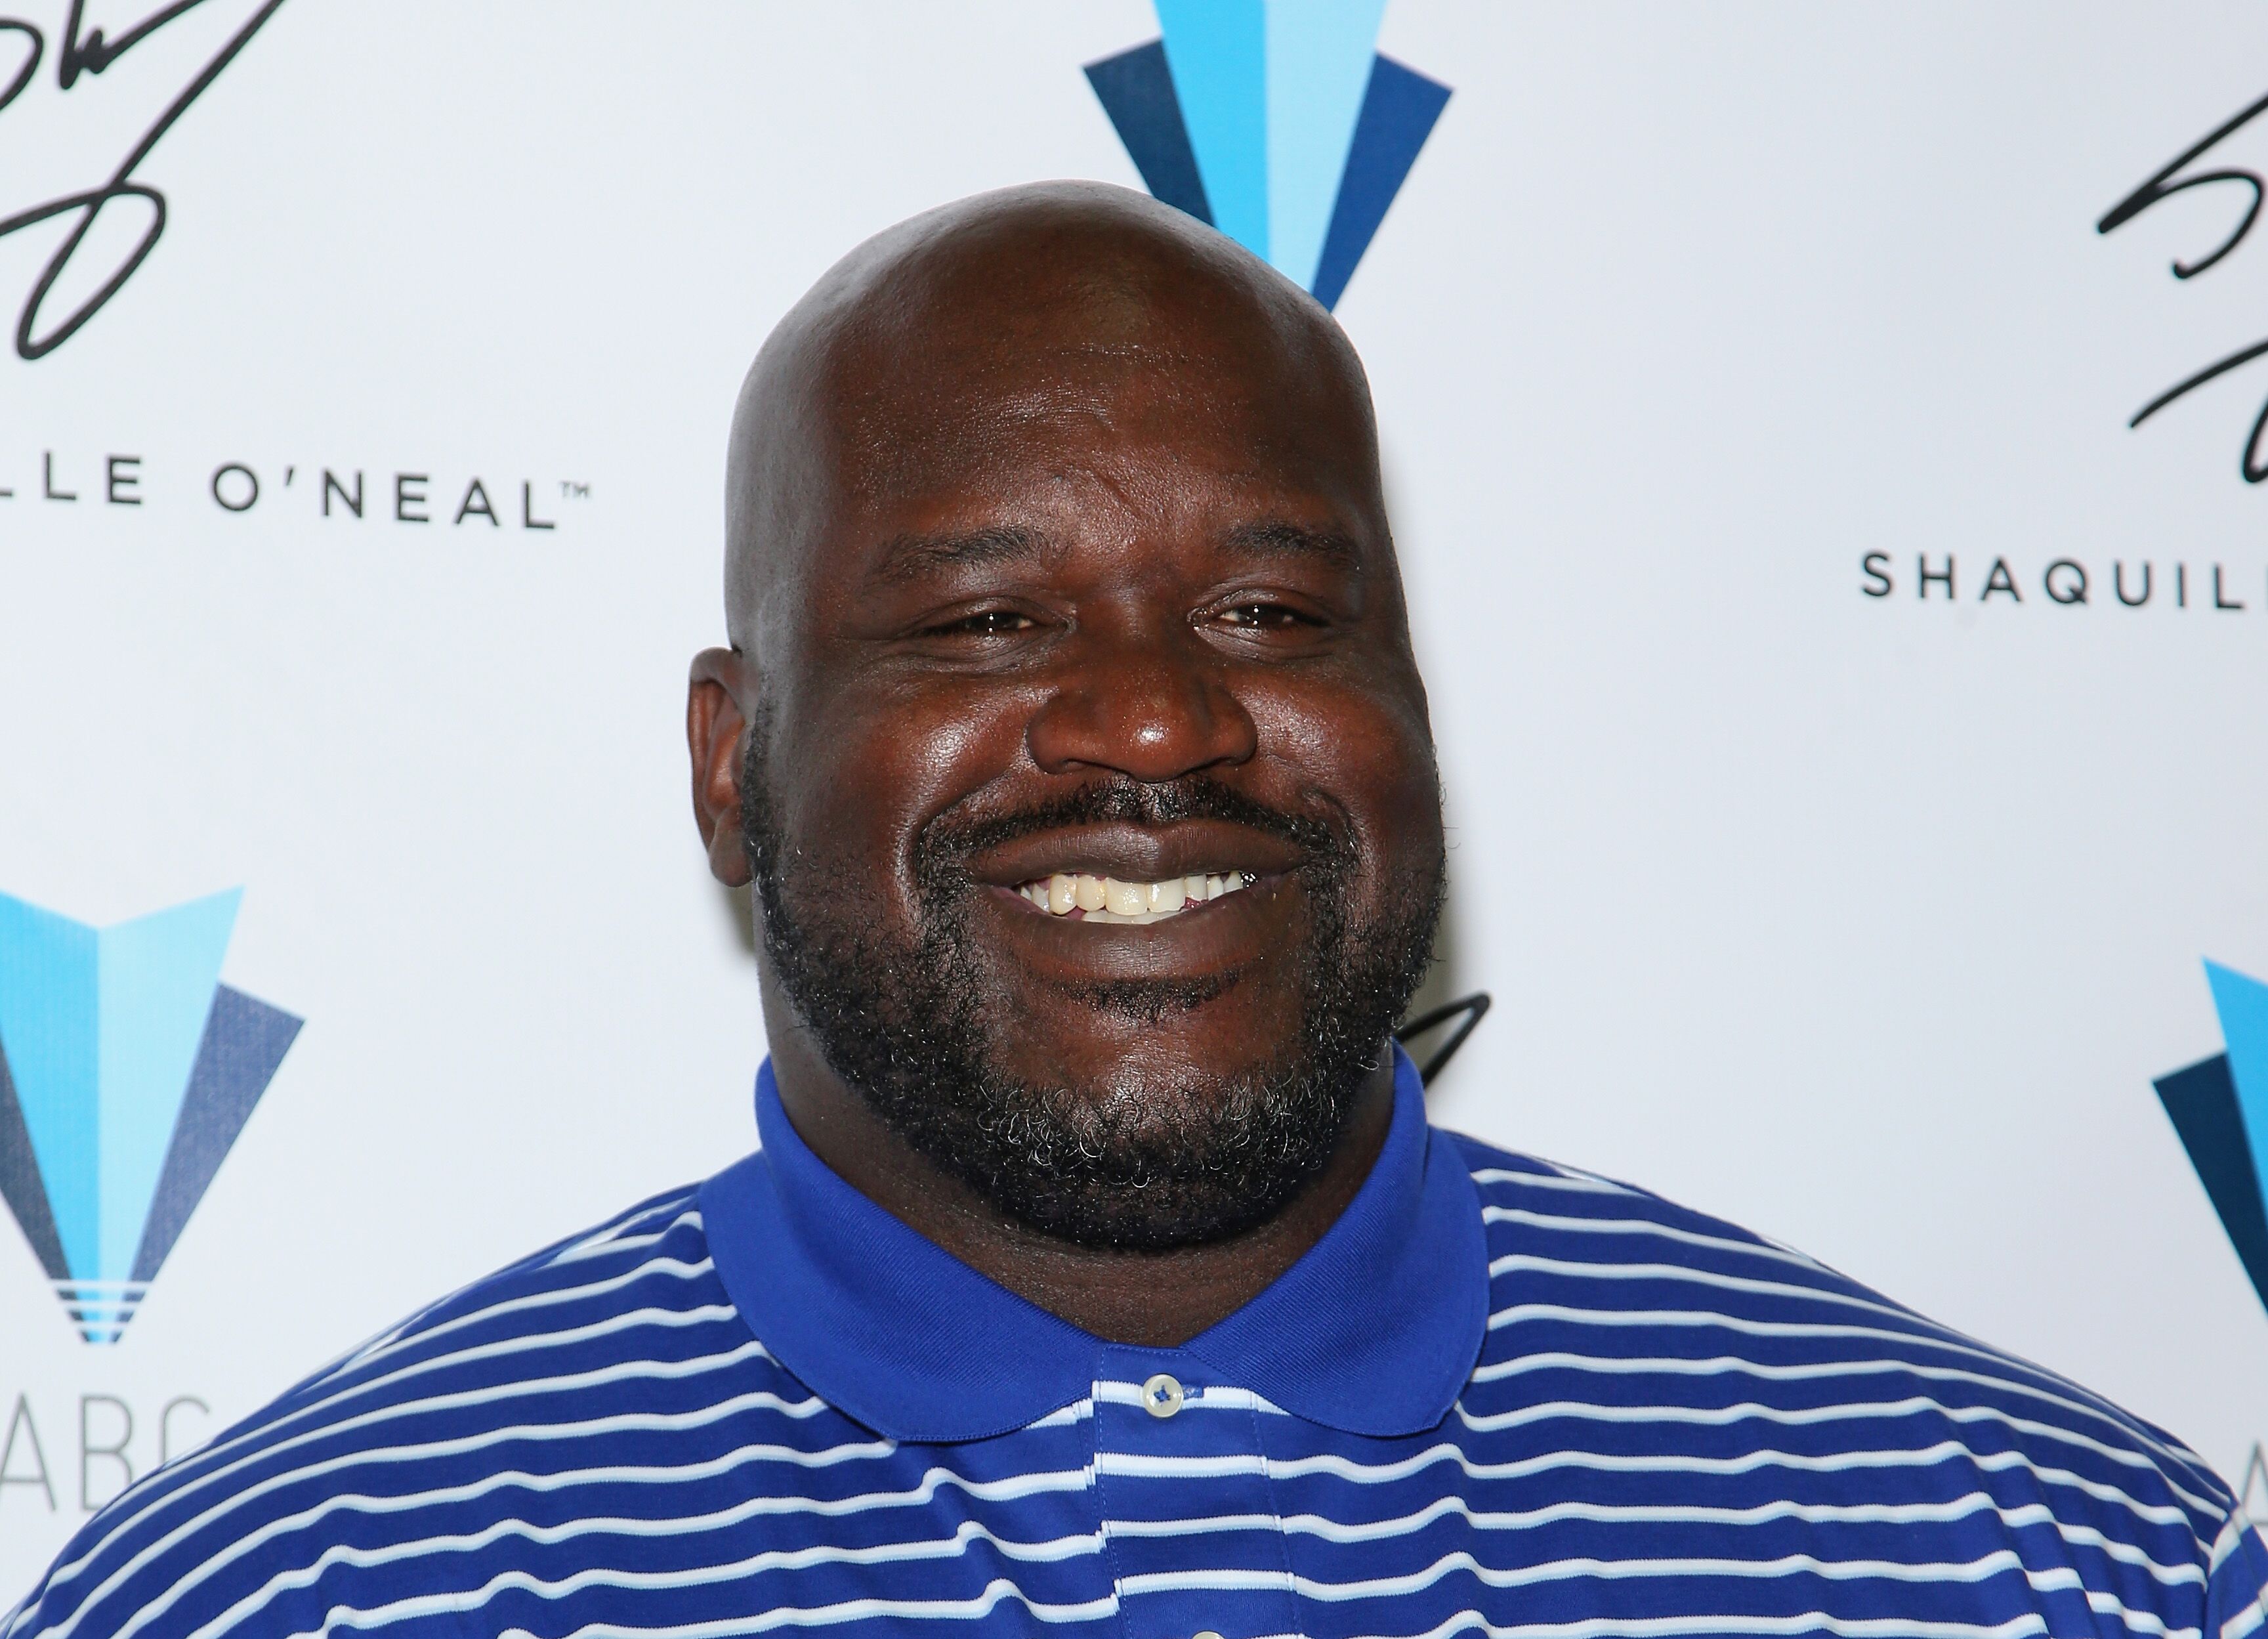 Shaquille O'Neal pose sur le stand Authentic Brands Group lors de la Licensing Expo. | Source : Getty Images